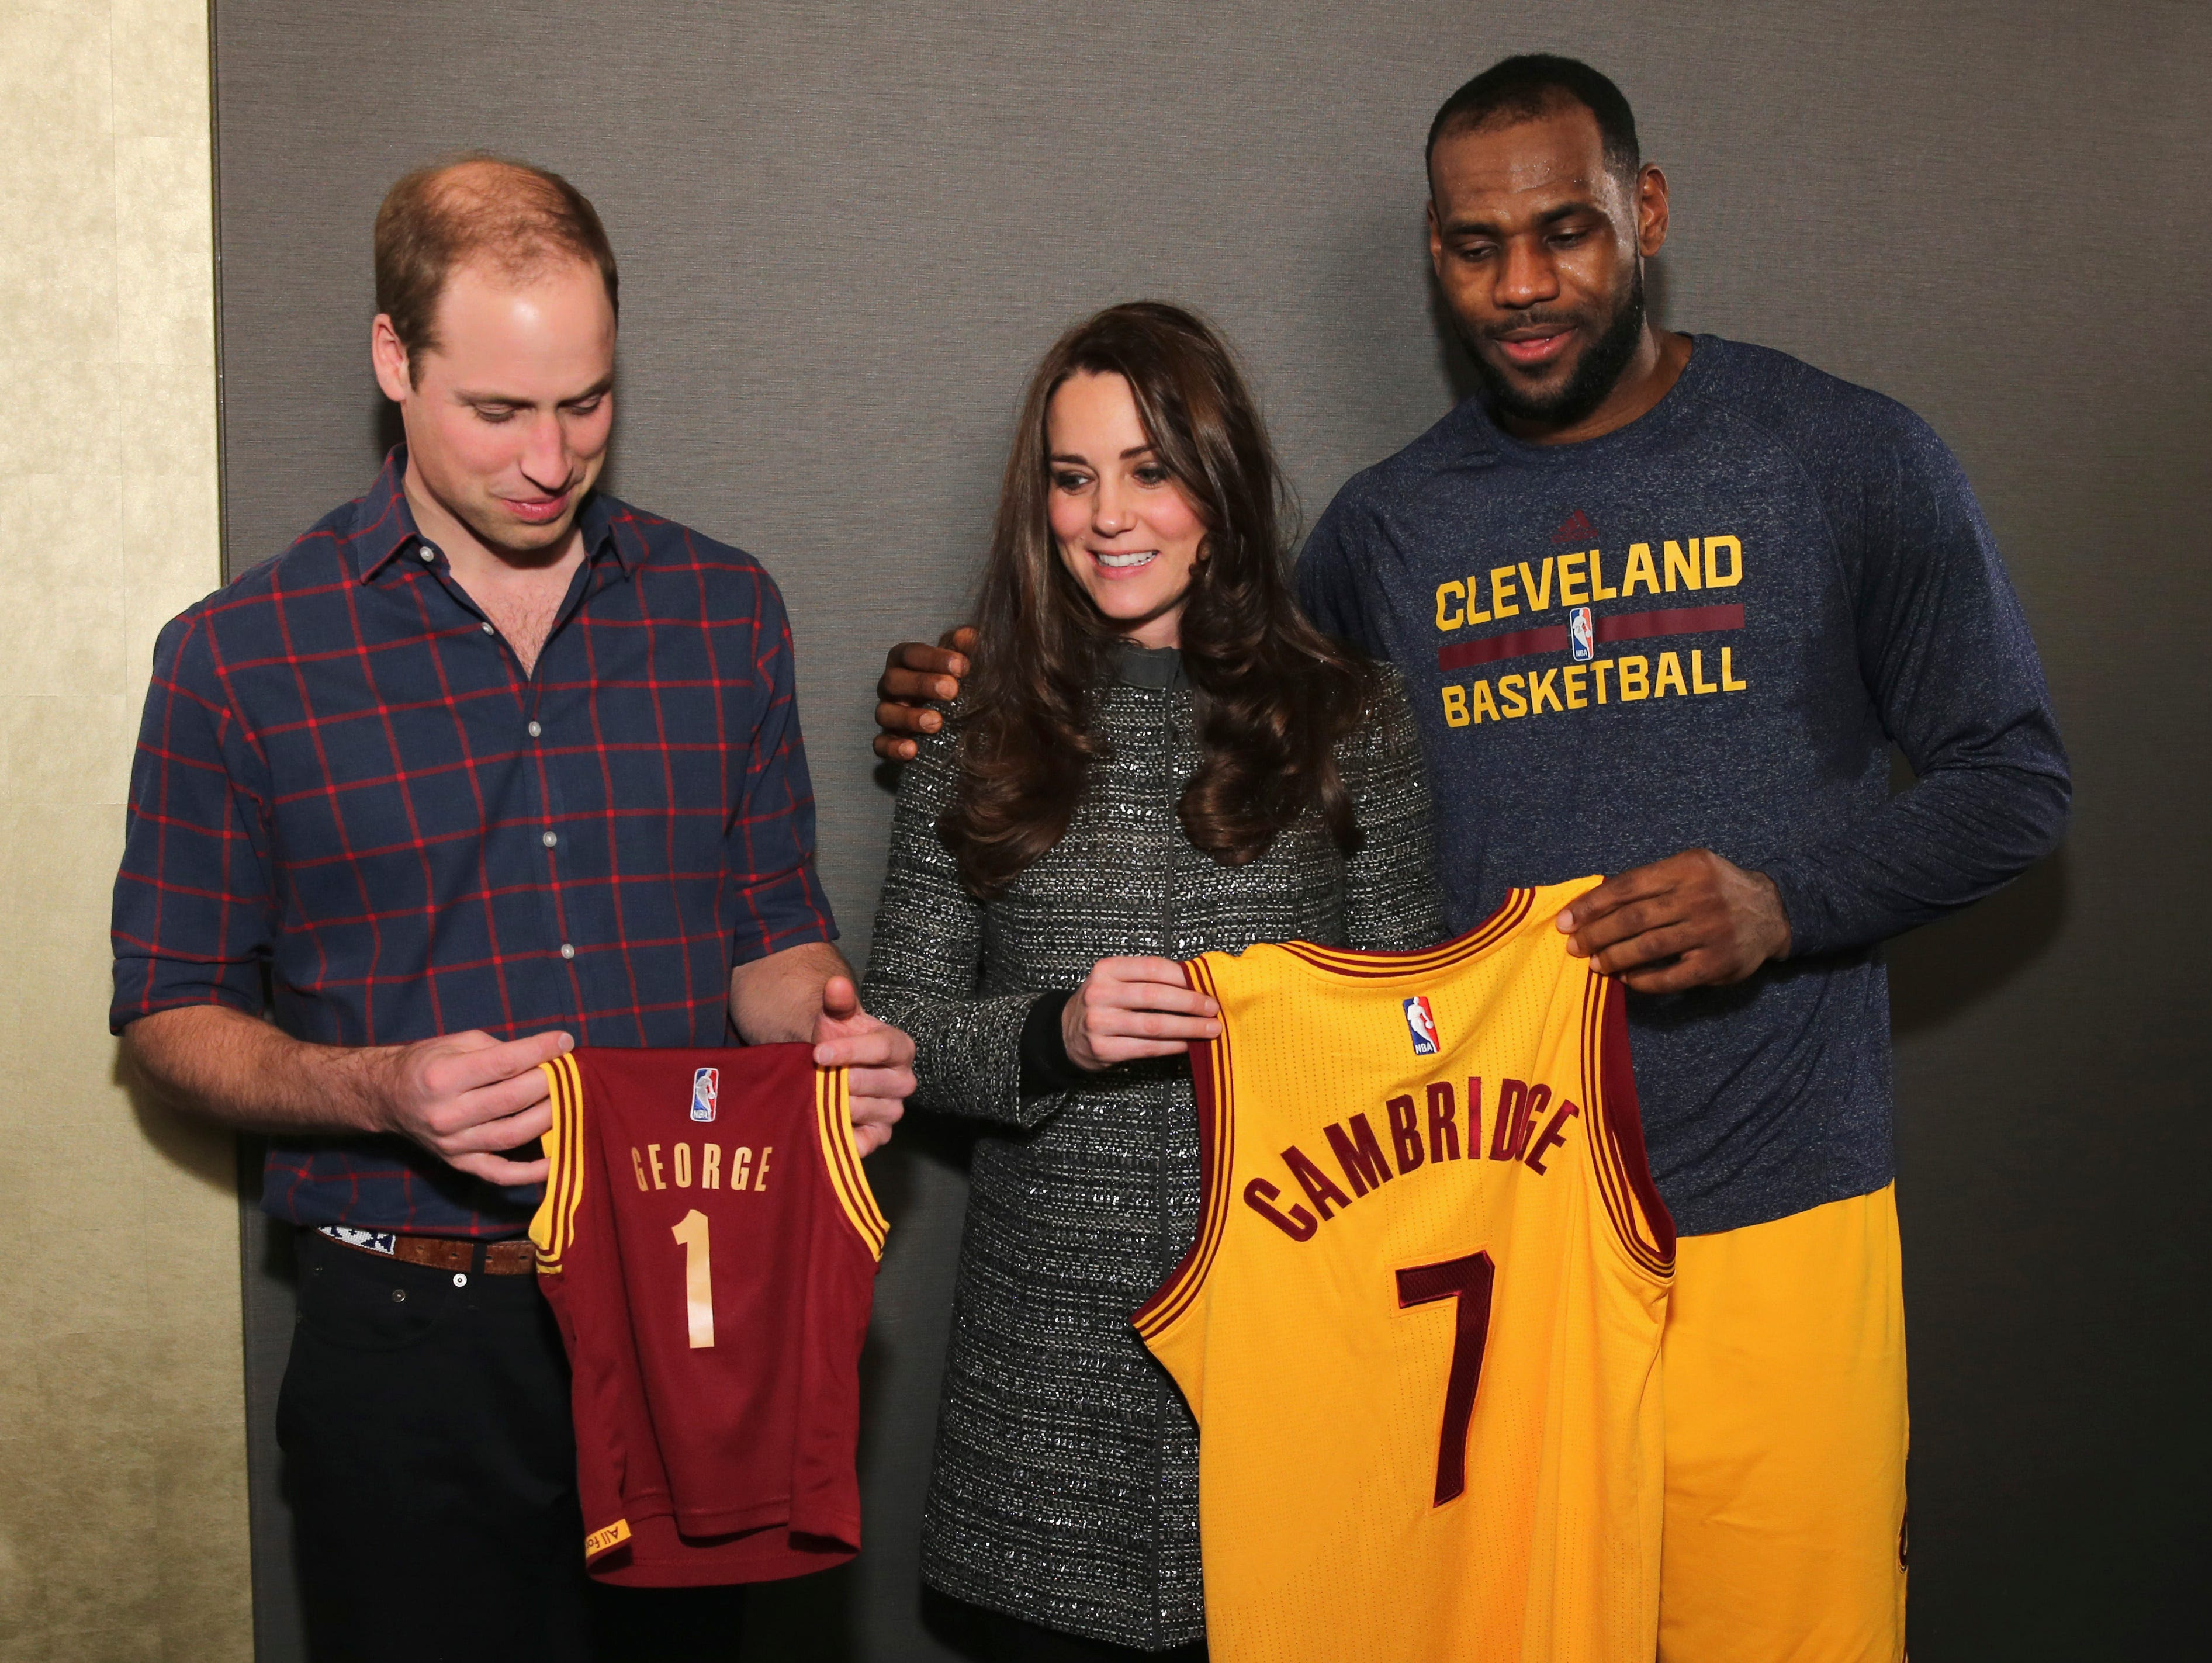 Prince William, Duchess Kate and LeBron James pose after a basketball game between the Cavaliers and the Brooklyn Nets on Dec. 8 in New York.